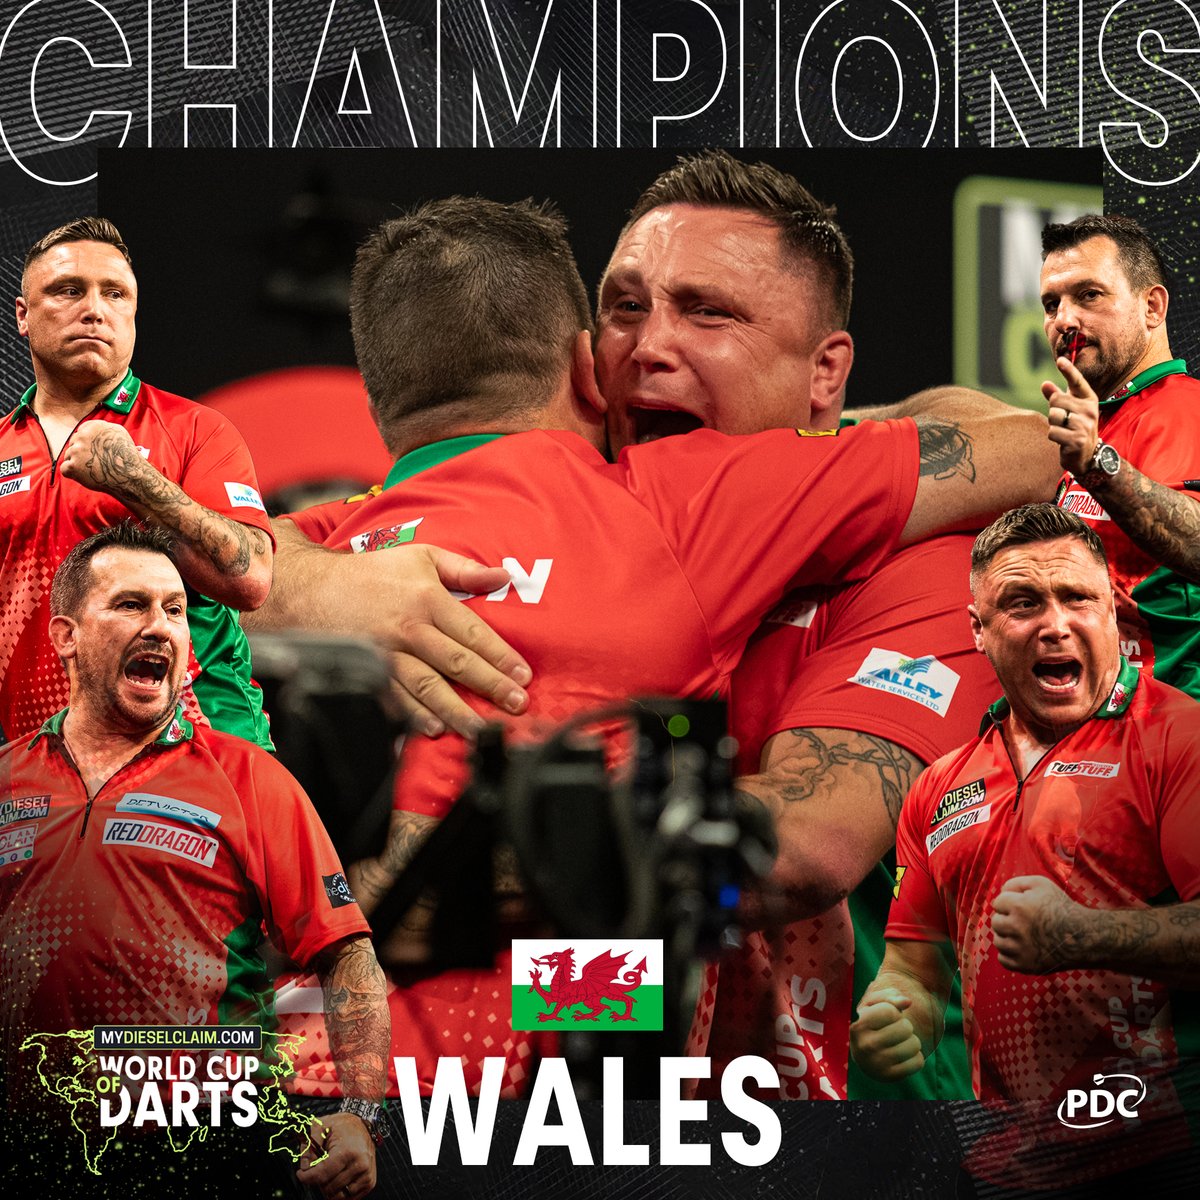 WALES ARE THE 2023 MY DIESEL CLAIM WORLD CUP CHAMPIONS!! 🏴󠁧󠁢󠁷󠁬󠁳󠁿🏆